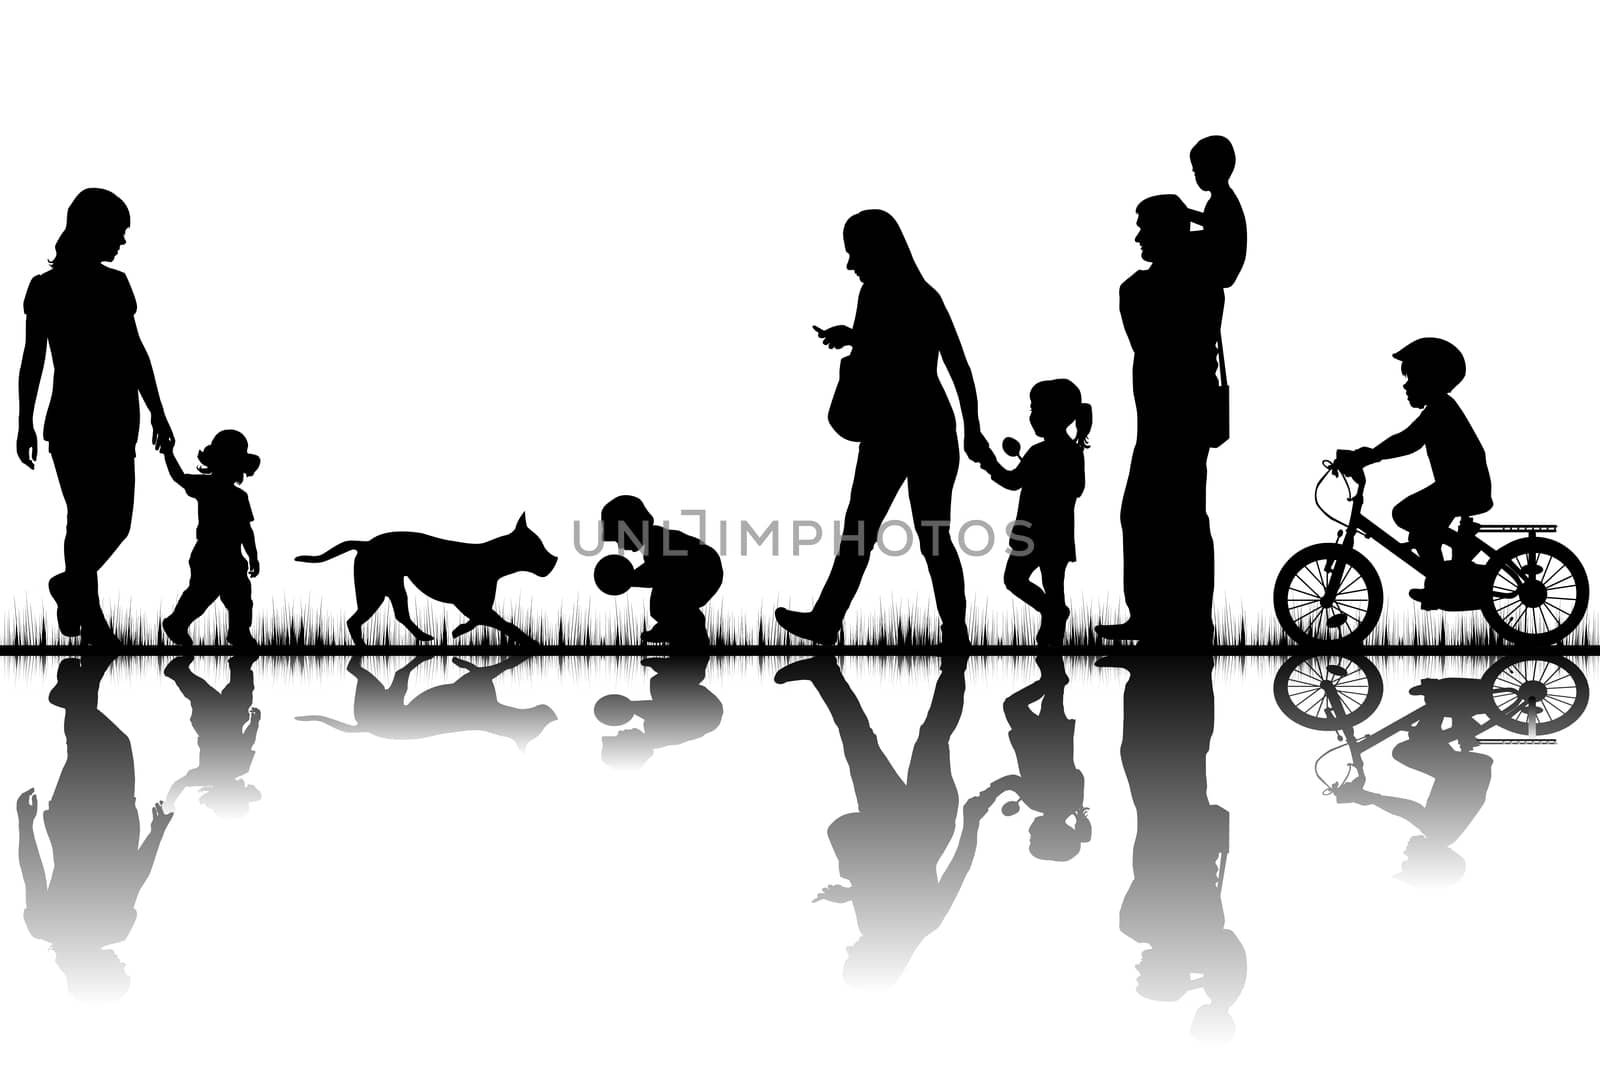 Family silhouettes in nature by hibrida13